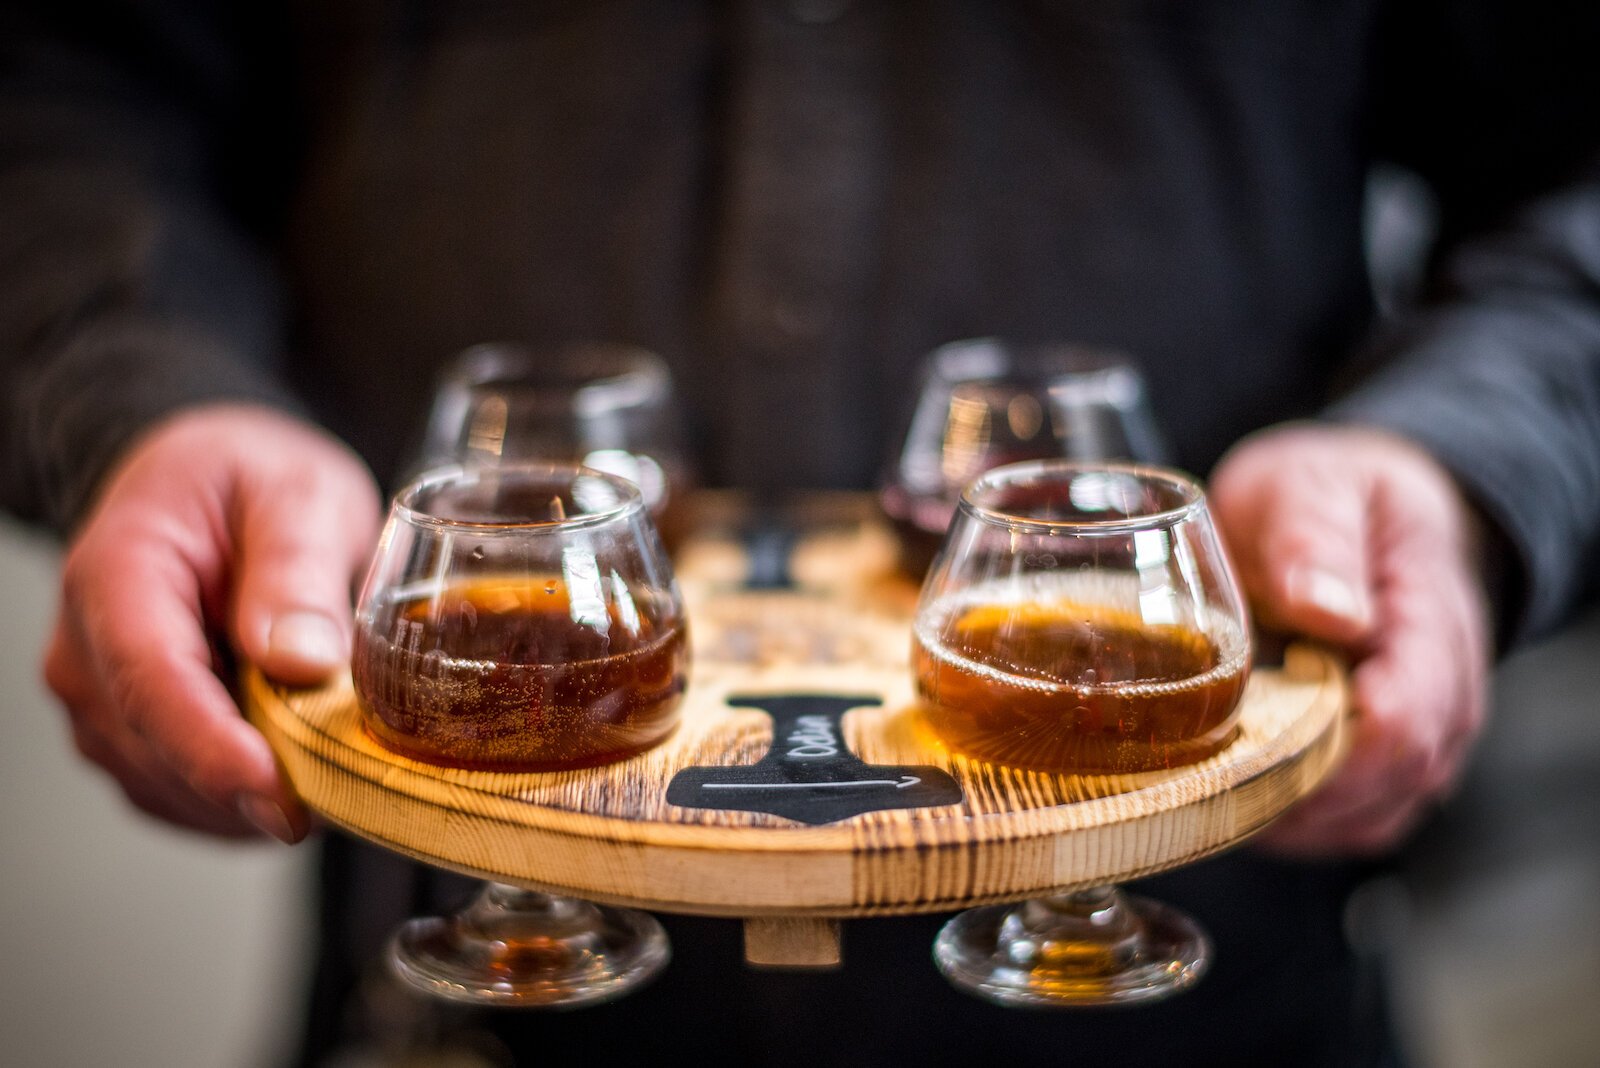 A flight of mead might be all it takes to start out your night at Valhalla.